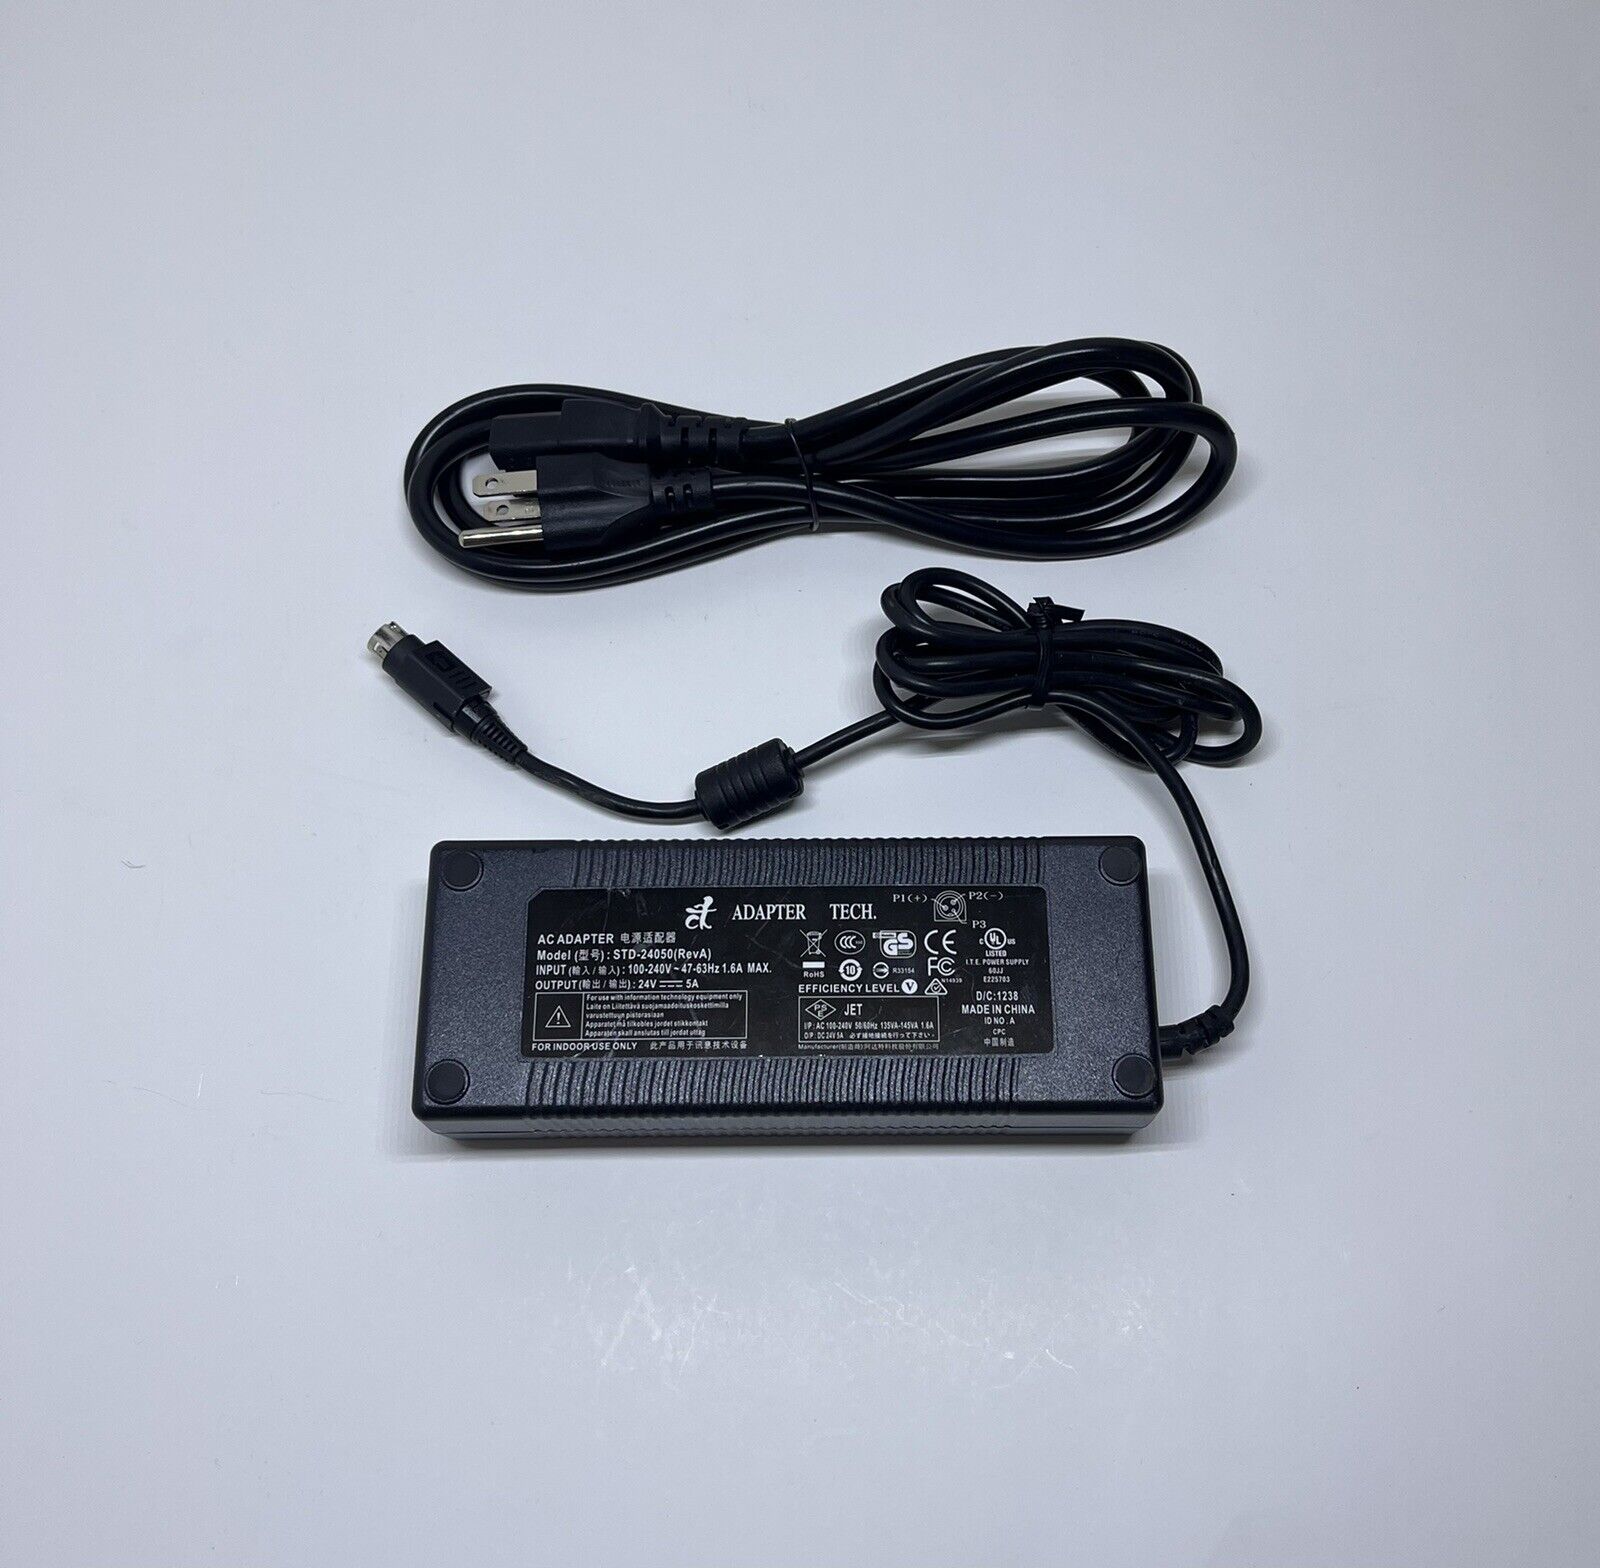 Adapter Tech STD-24050 AC Adapter / Power Supply Model 24V -- 5A with Power Cord Brand: Adapter Tech Compatible Brand